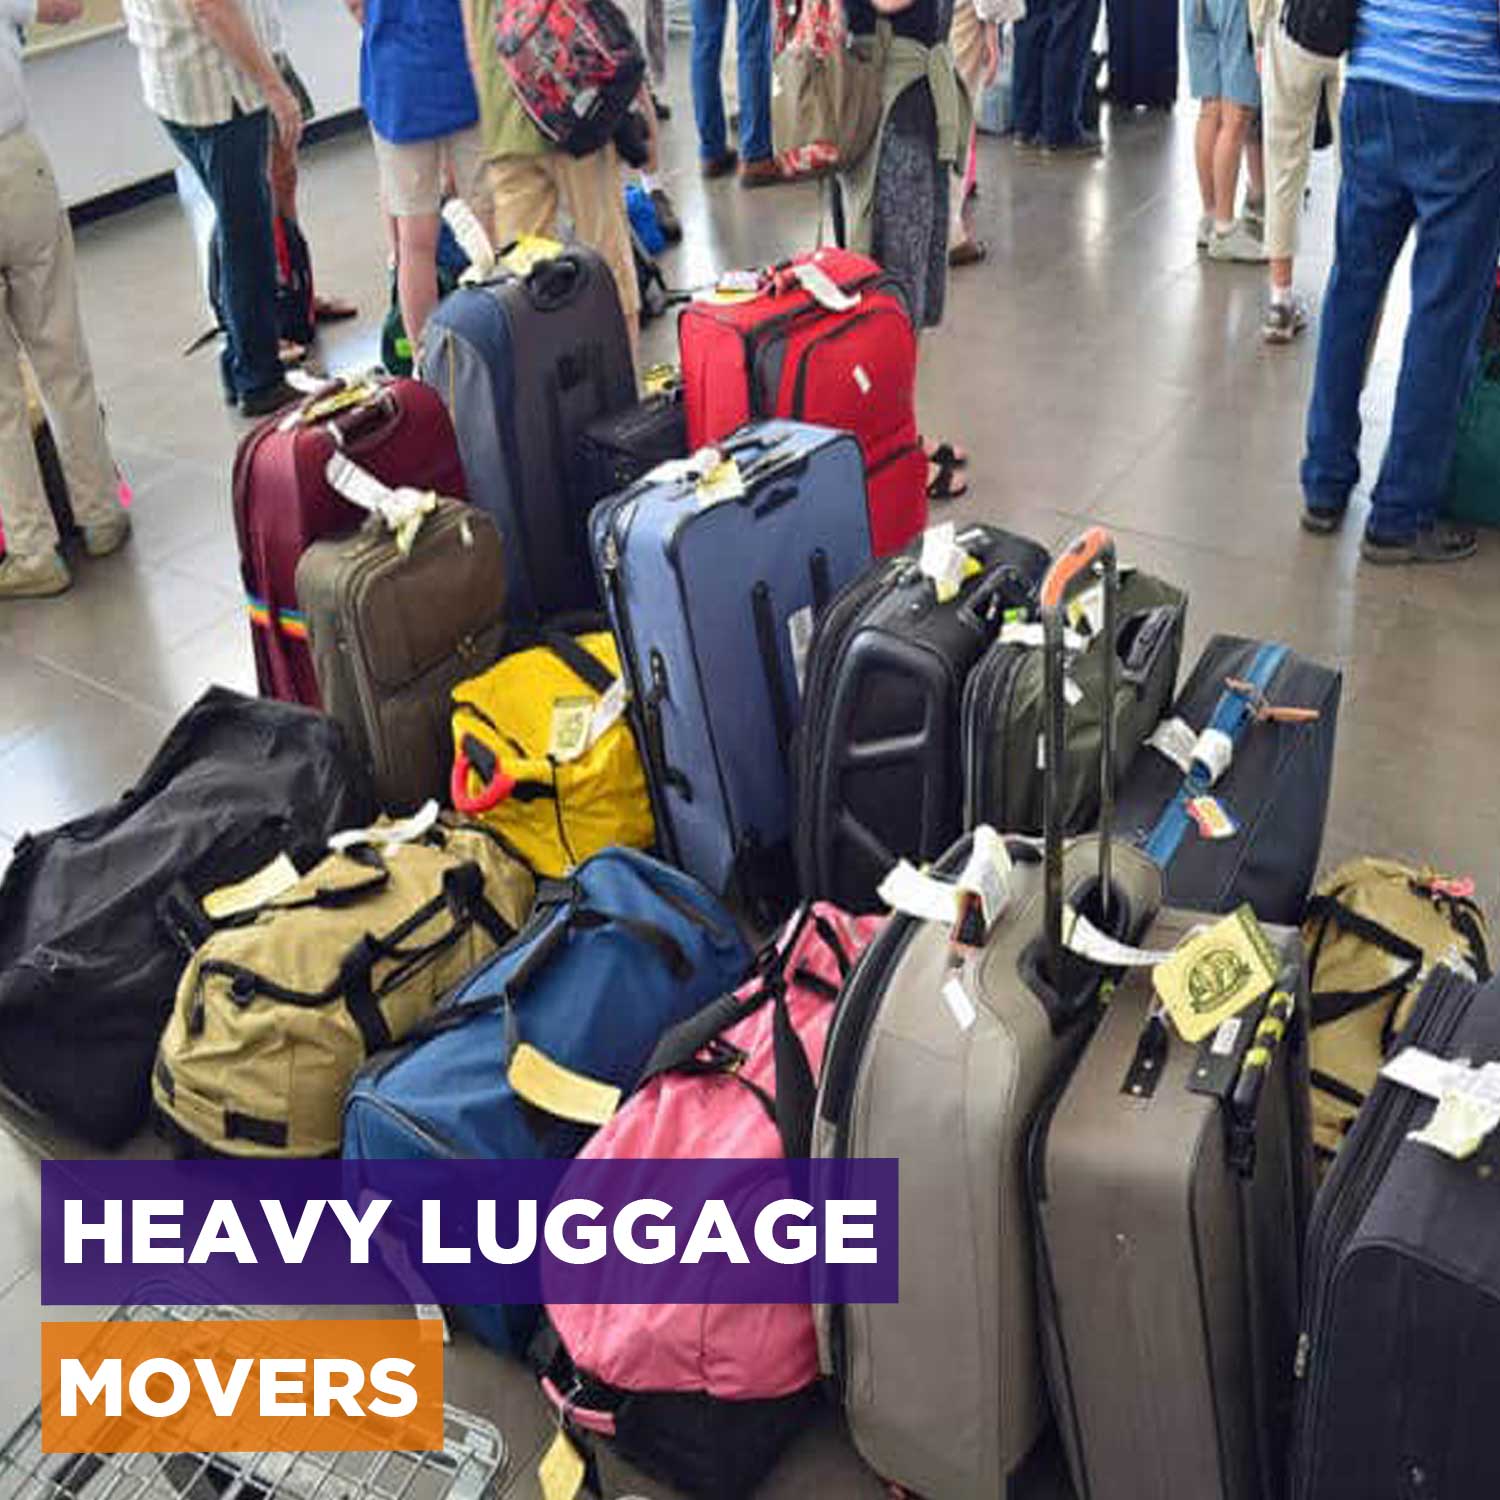 Heavy Luggage Movers | Transport Your Heavy Luggage to Airport or Port